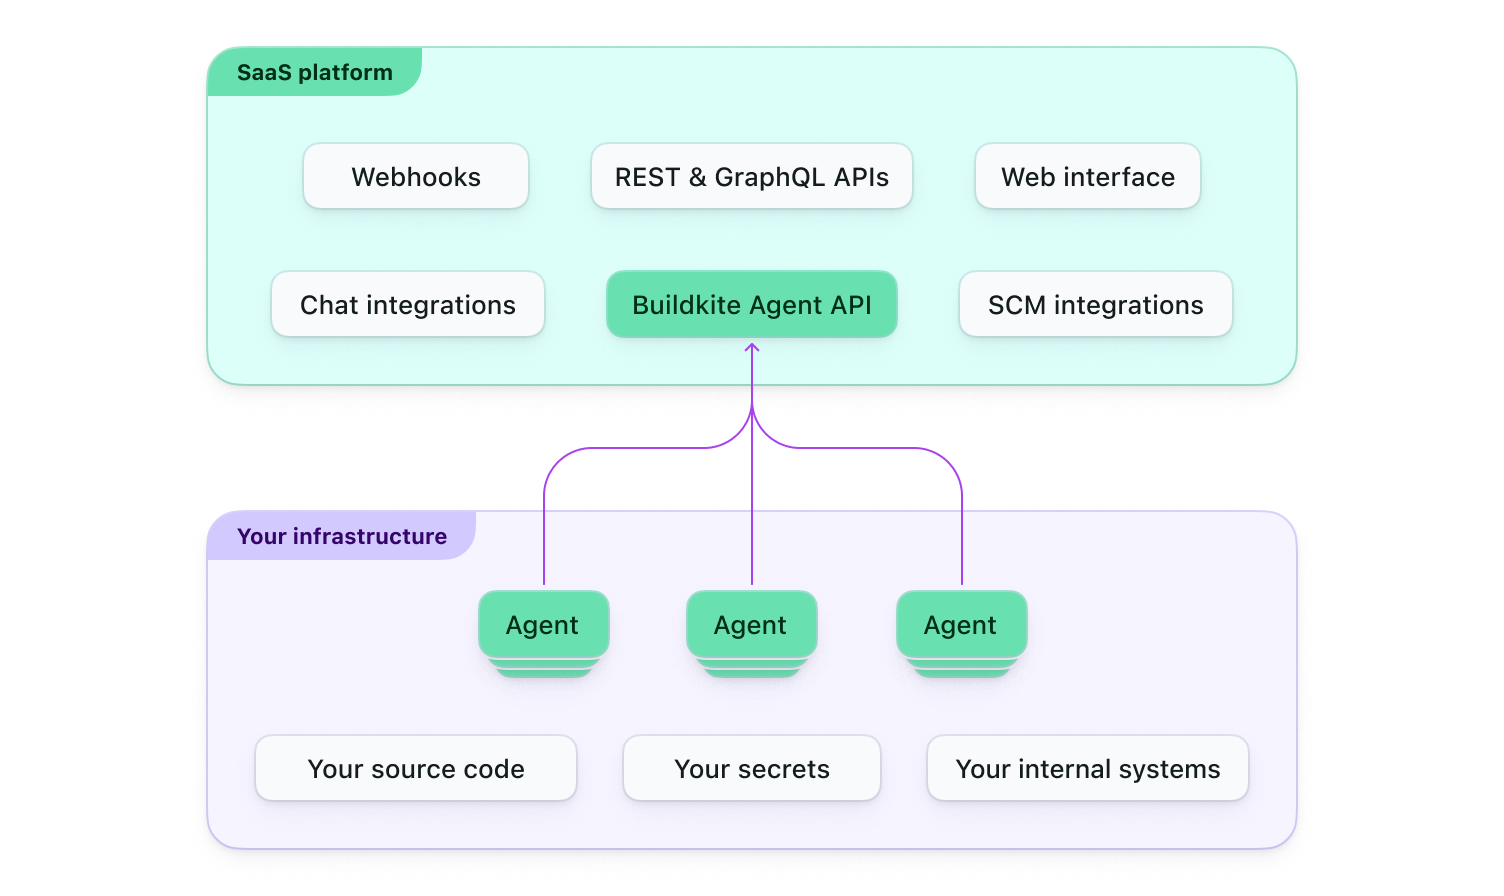 Shows the hybrid architecture combining a SaaS platform with your infrastructure